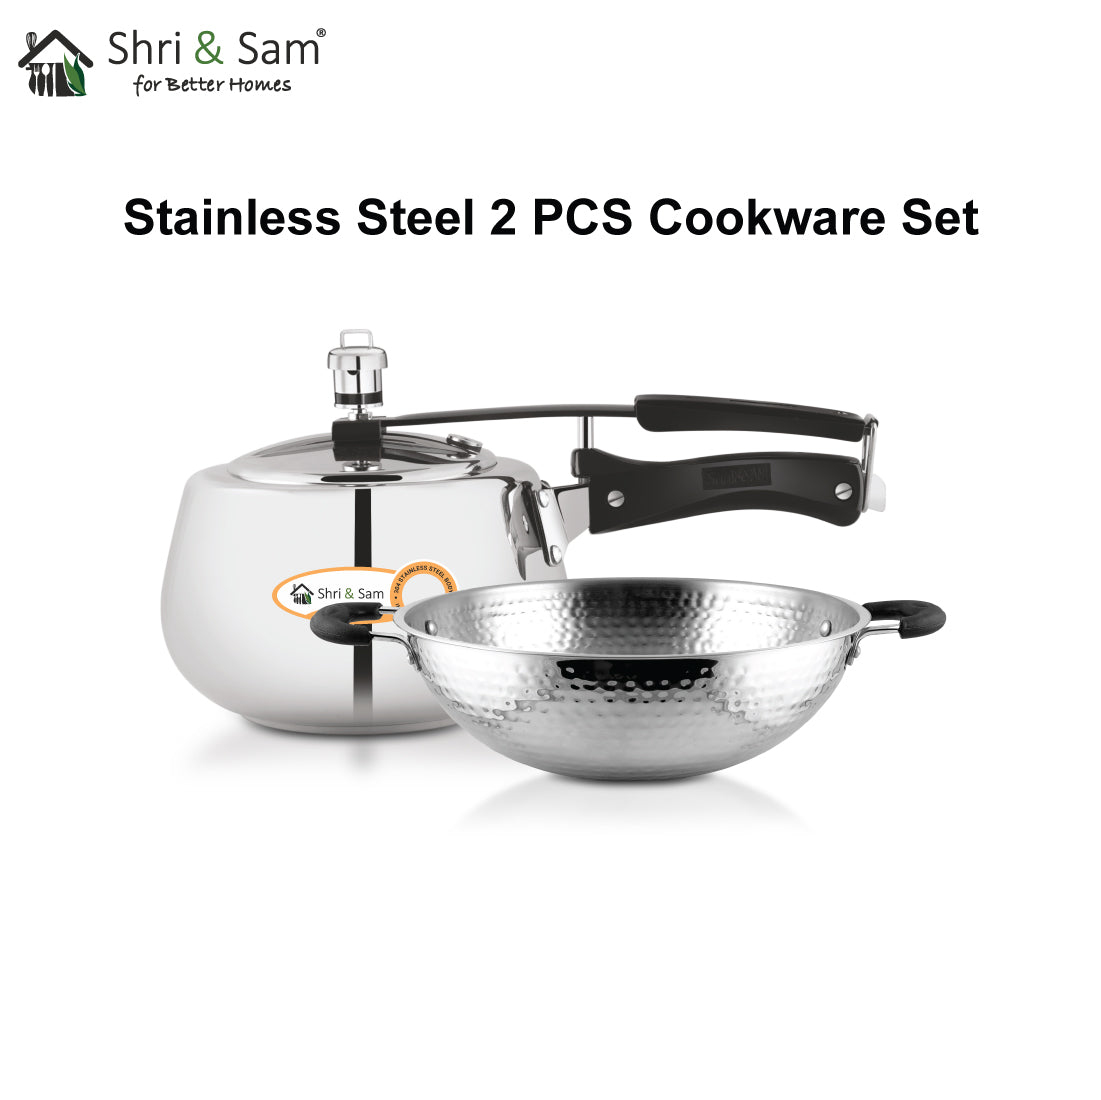 Stainless Steel 2 PCS Cookware Set